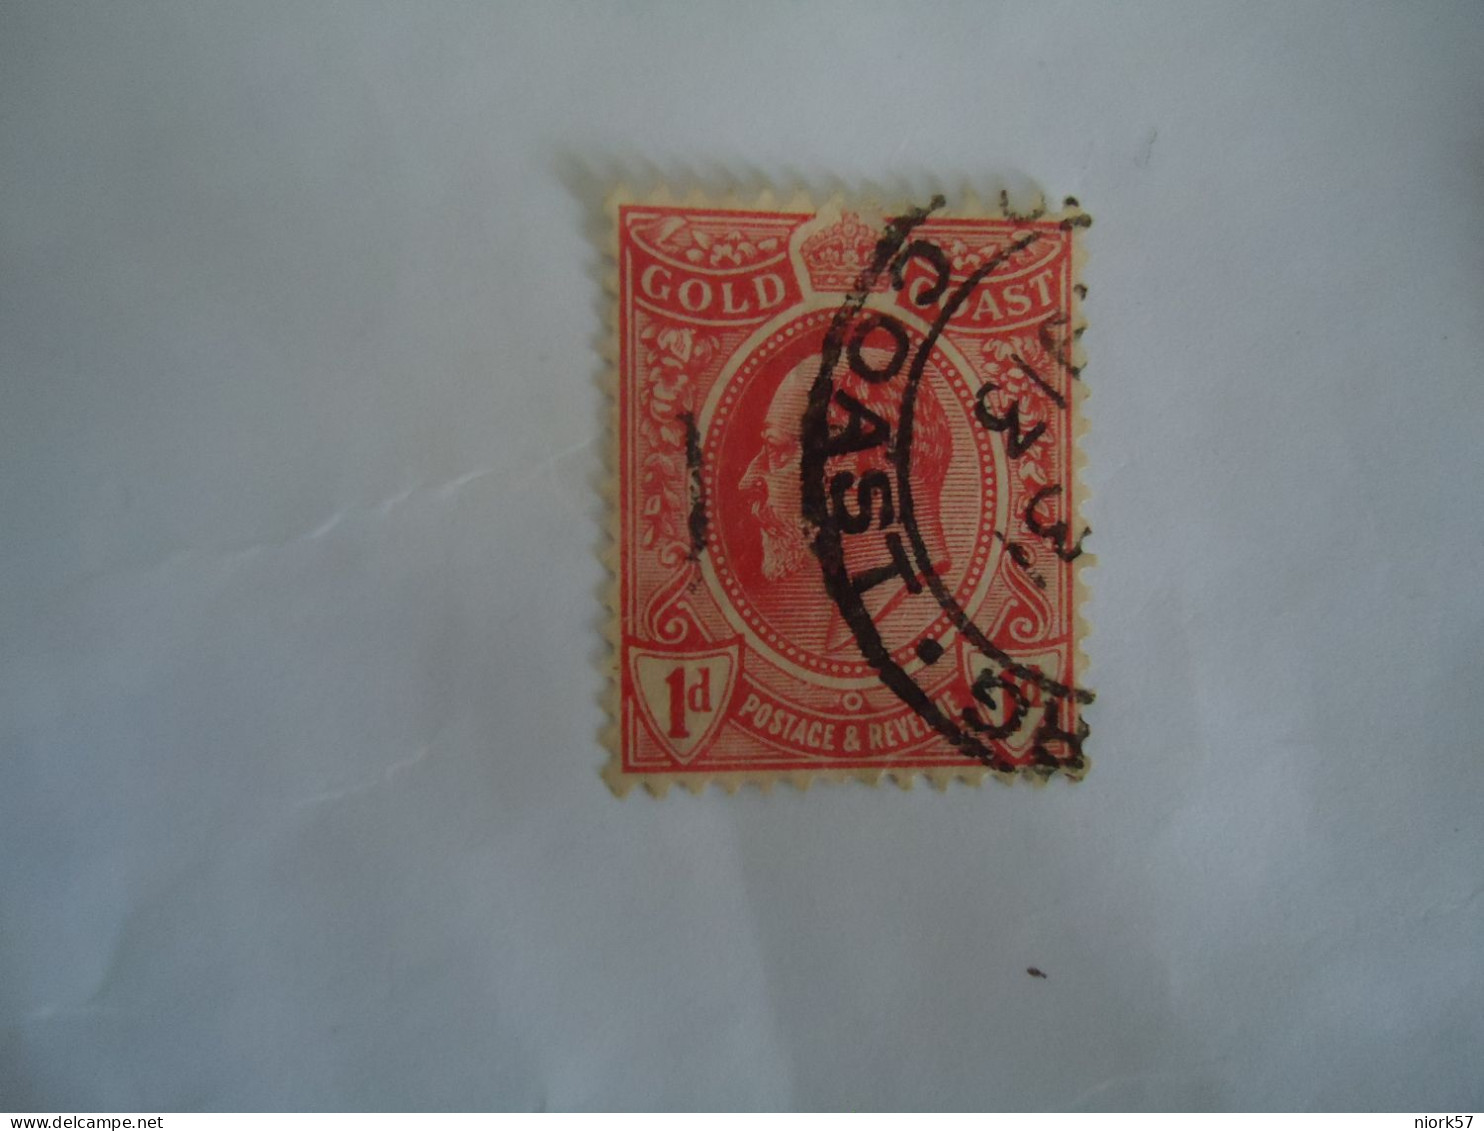 GOLD COAST  USED   STAMPS  KING  WITH POSTMARK - Gold Coast (...-1957)